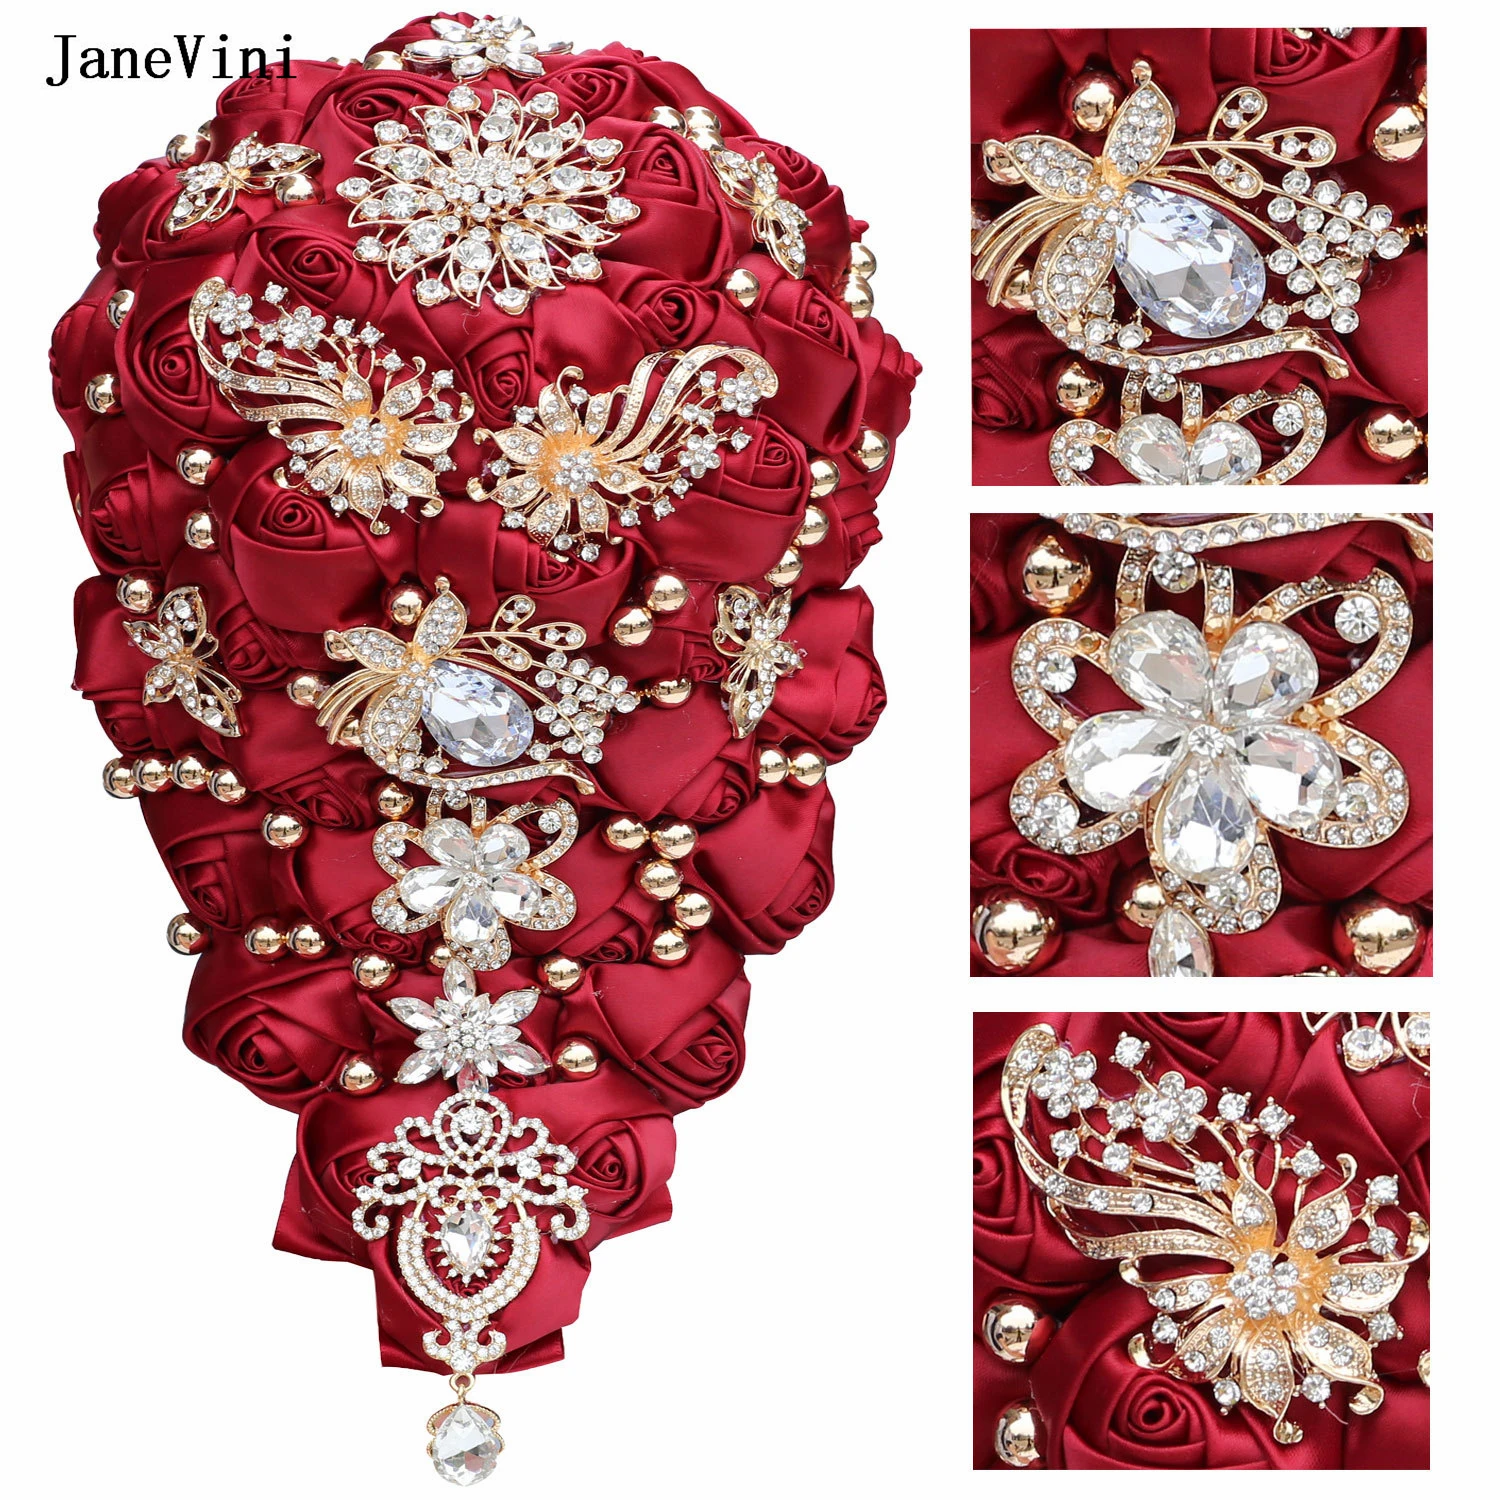 

JaneVini New Burgundy Cascading Bridal Bouquets with Gold Jewelry Handmade Satin Roses Crystals Waterfall Wedding Bouquet Flower